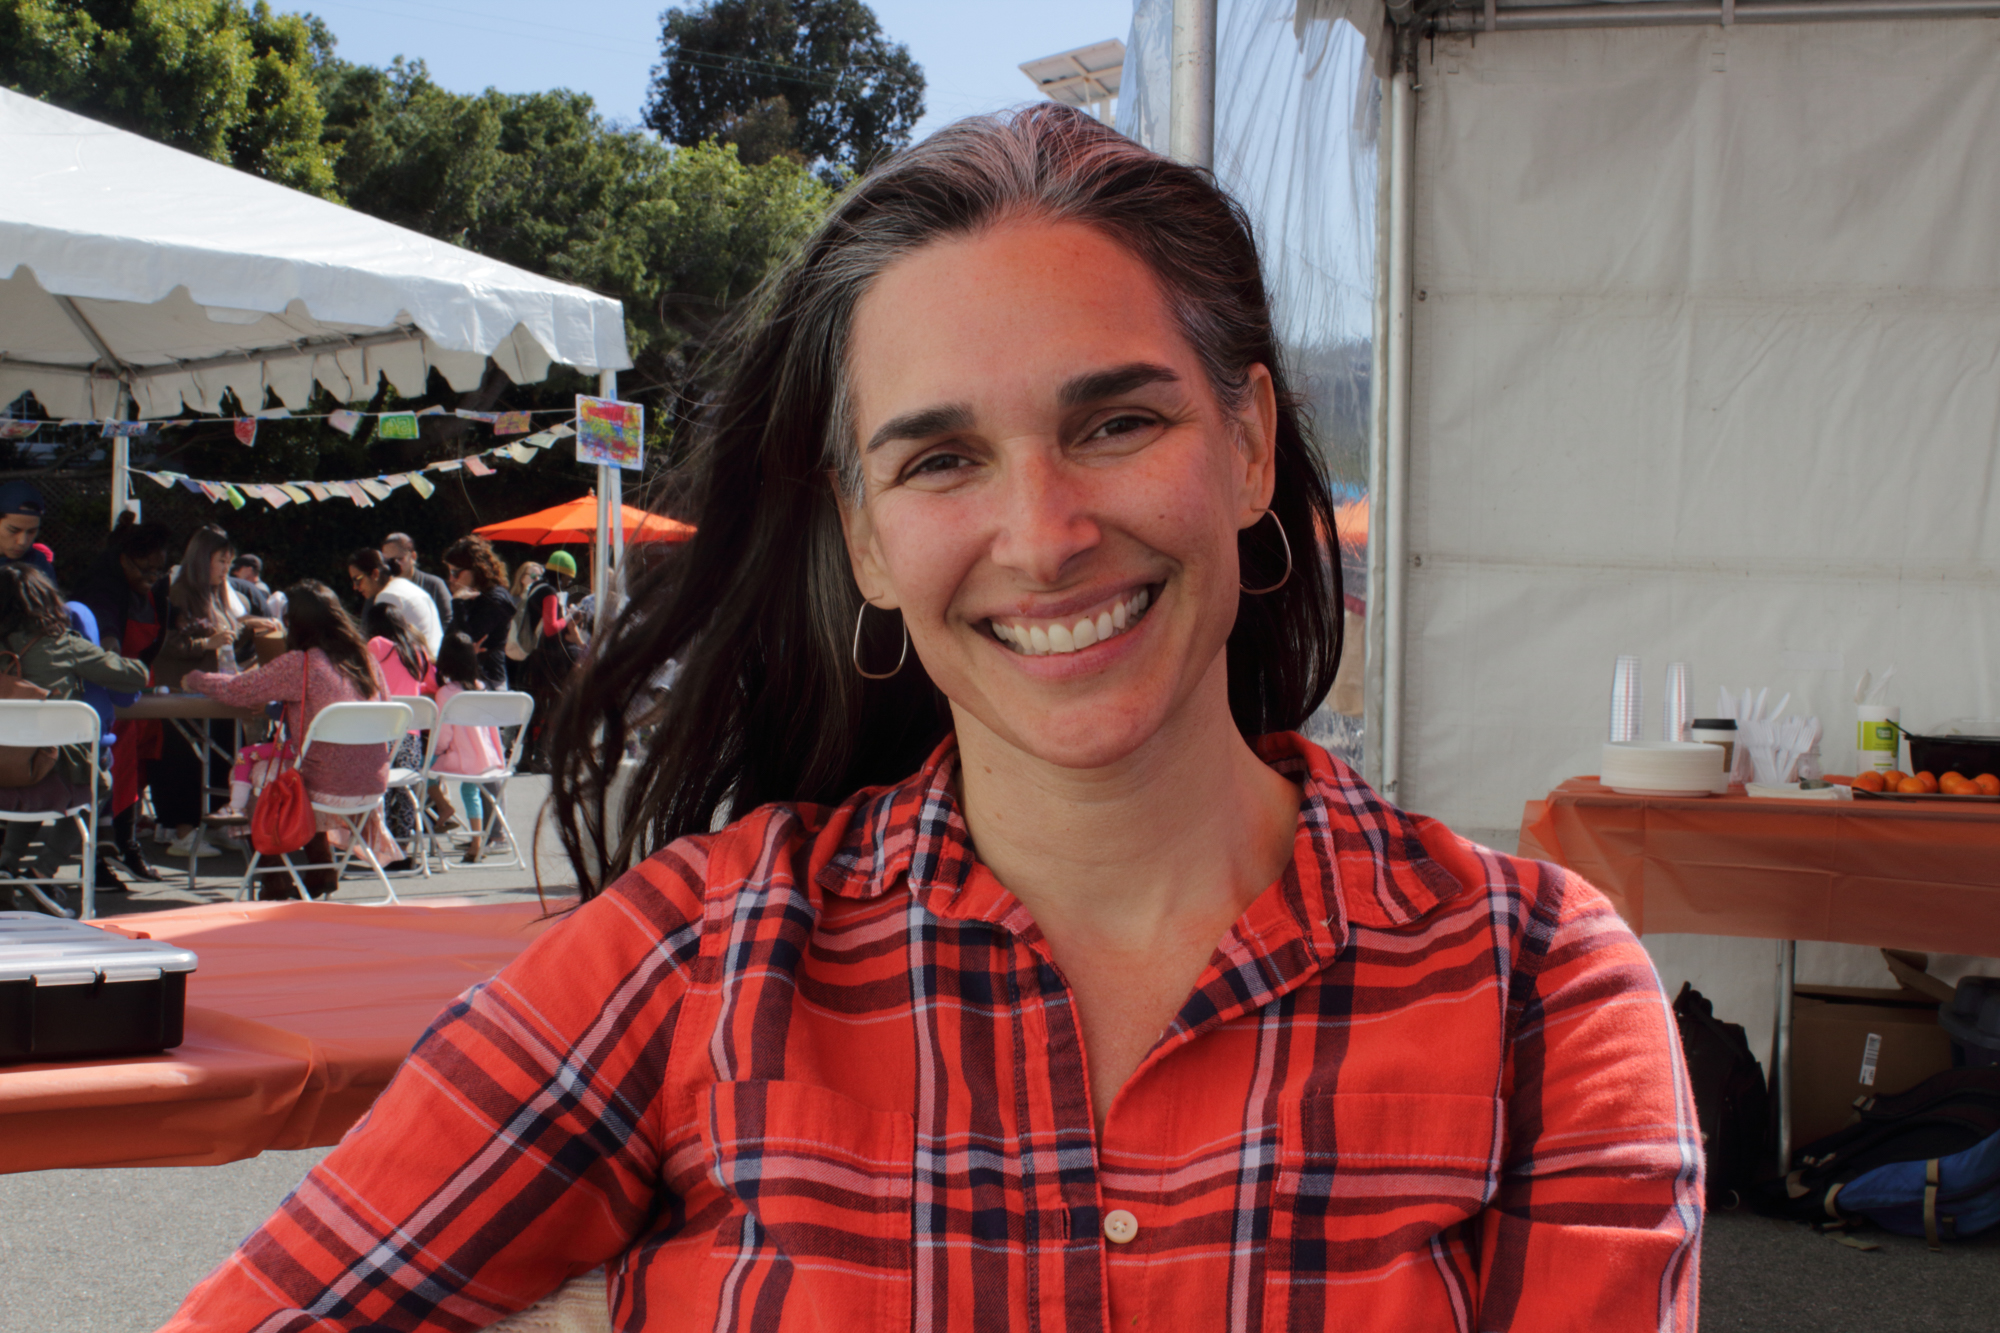  Allison Ostrovsky, City of Santa Monica Cultural Affairs Supervisor and event coordinator for the Santa Monica ArtWalk, near the information booth at the main entrance of the 12 Annual Santa Monica ArtWalk on March 24th, 2018 in Santa Monica, Califo